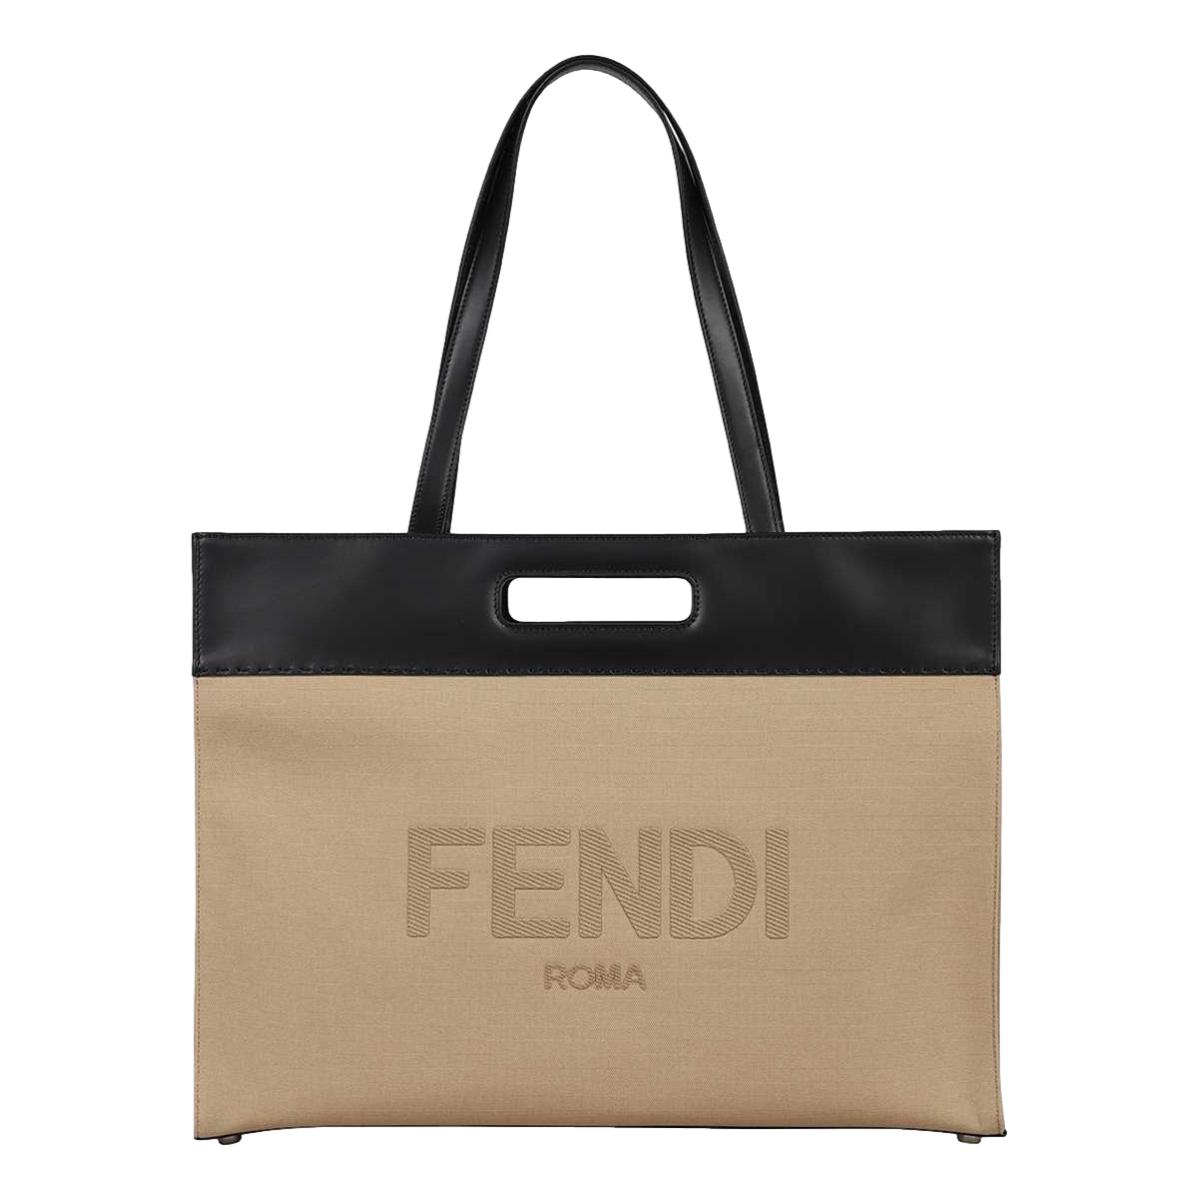 Fendi Logo 2-Way Shopping Tote Canvas and Leather Tote Bag 7VA480 at_Queen_Bee_of_Beverly_Hills